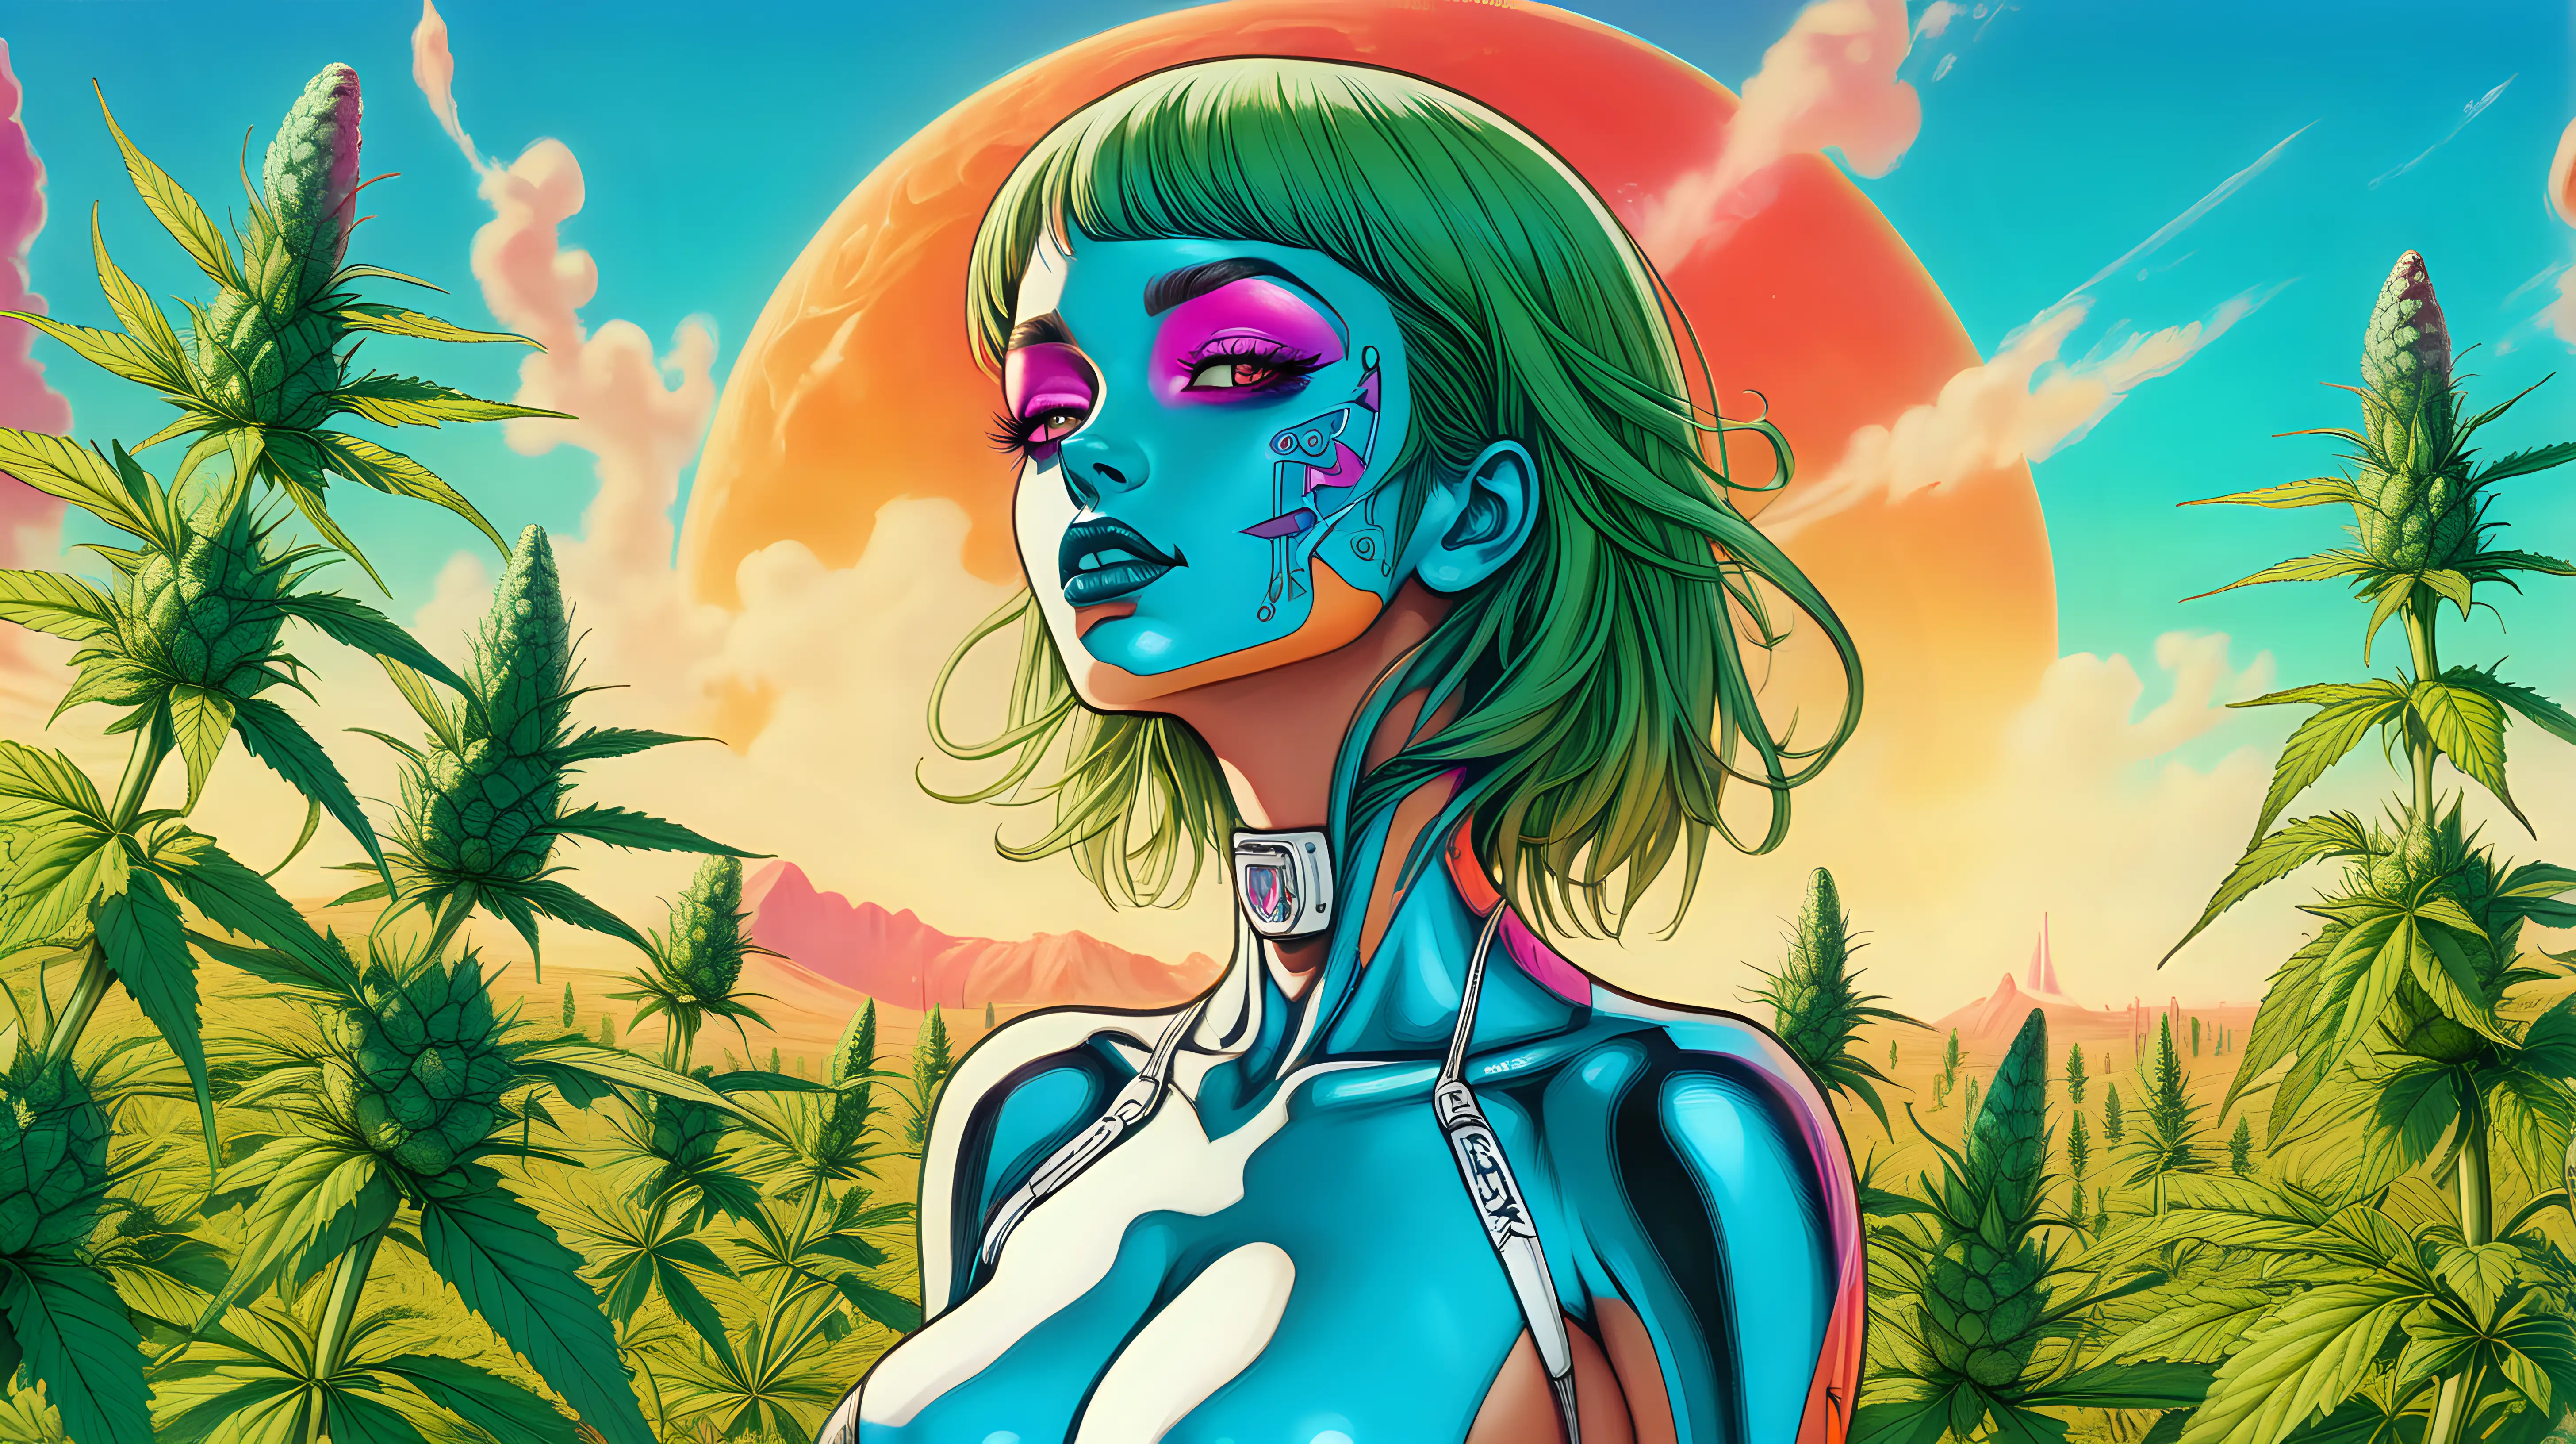 sexy exotic woman from another planet who just landed on earth in a field of cannabis, bright colors in the background sky
